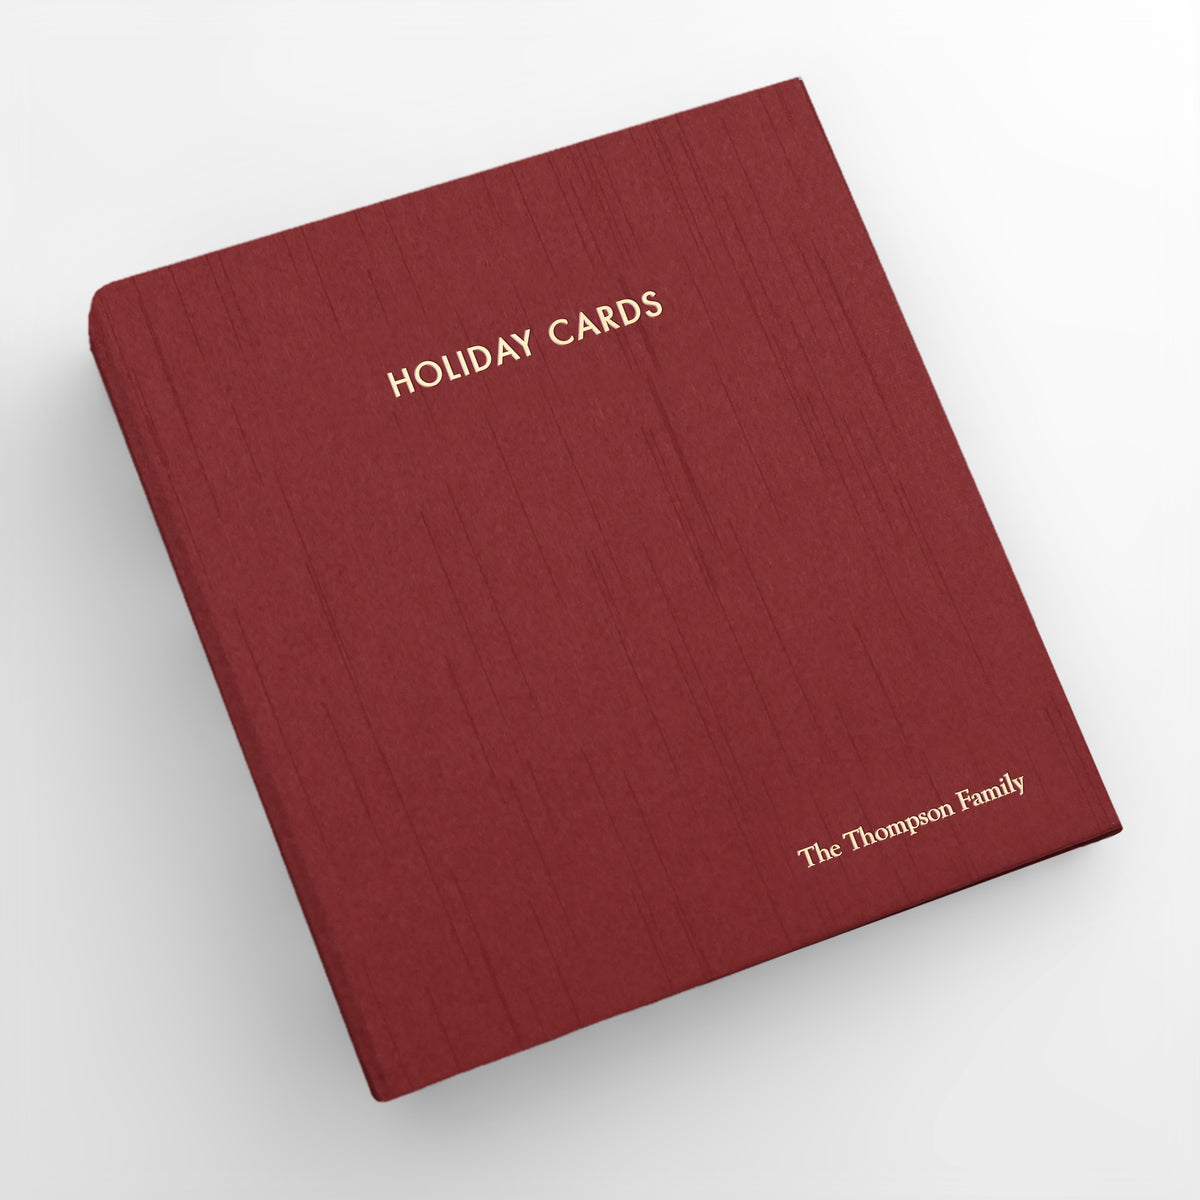 Holiday Card Album | Cover: Garnet Silk | Embossed with “Holiday Cards” | Available Personalized